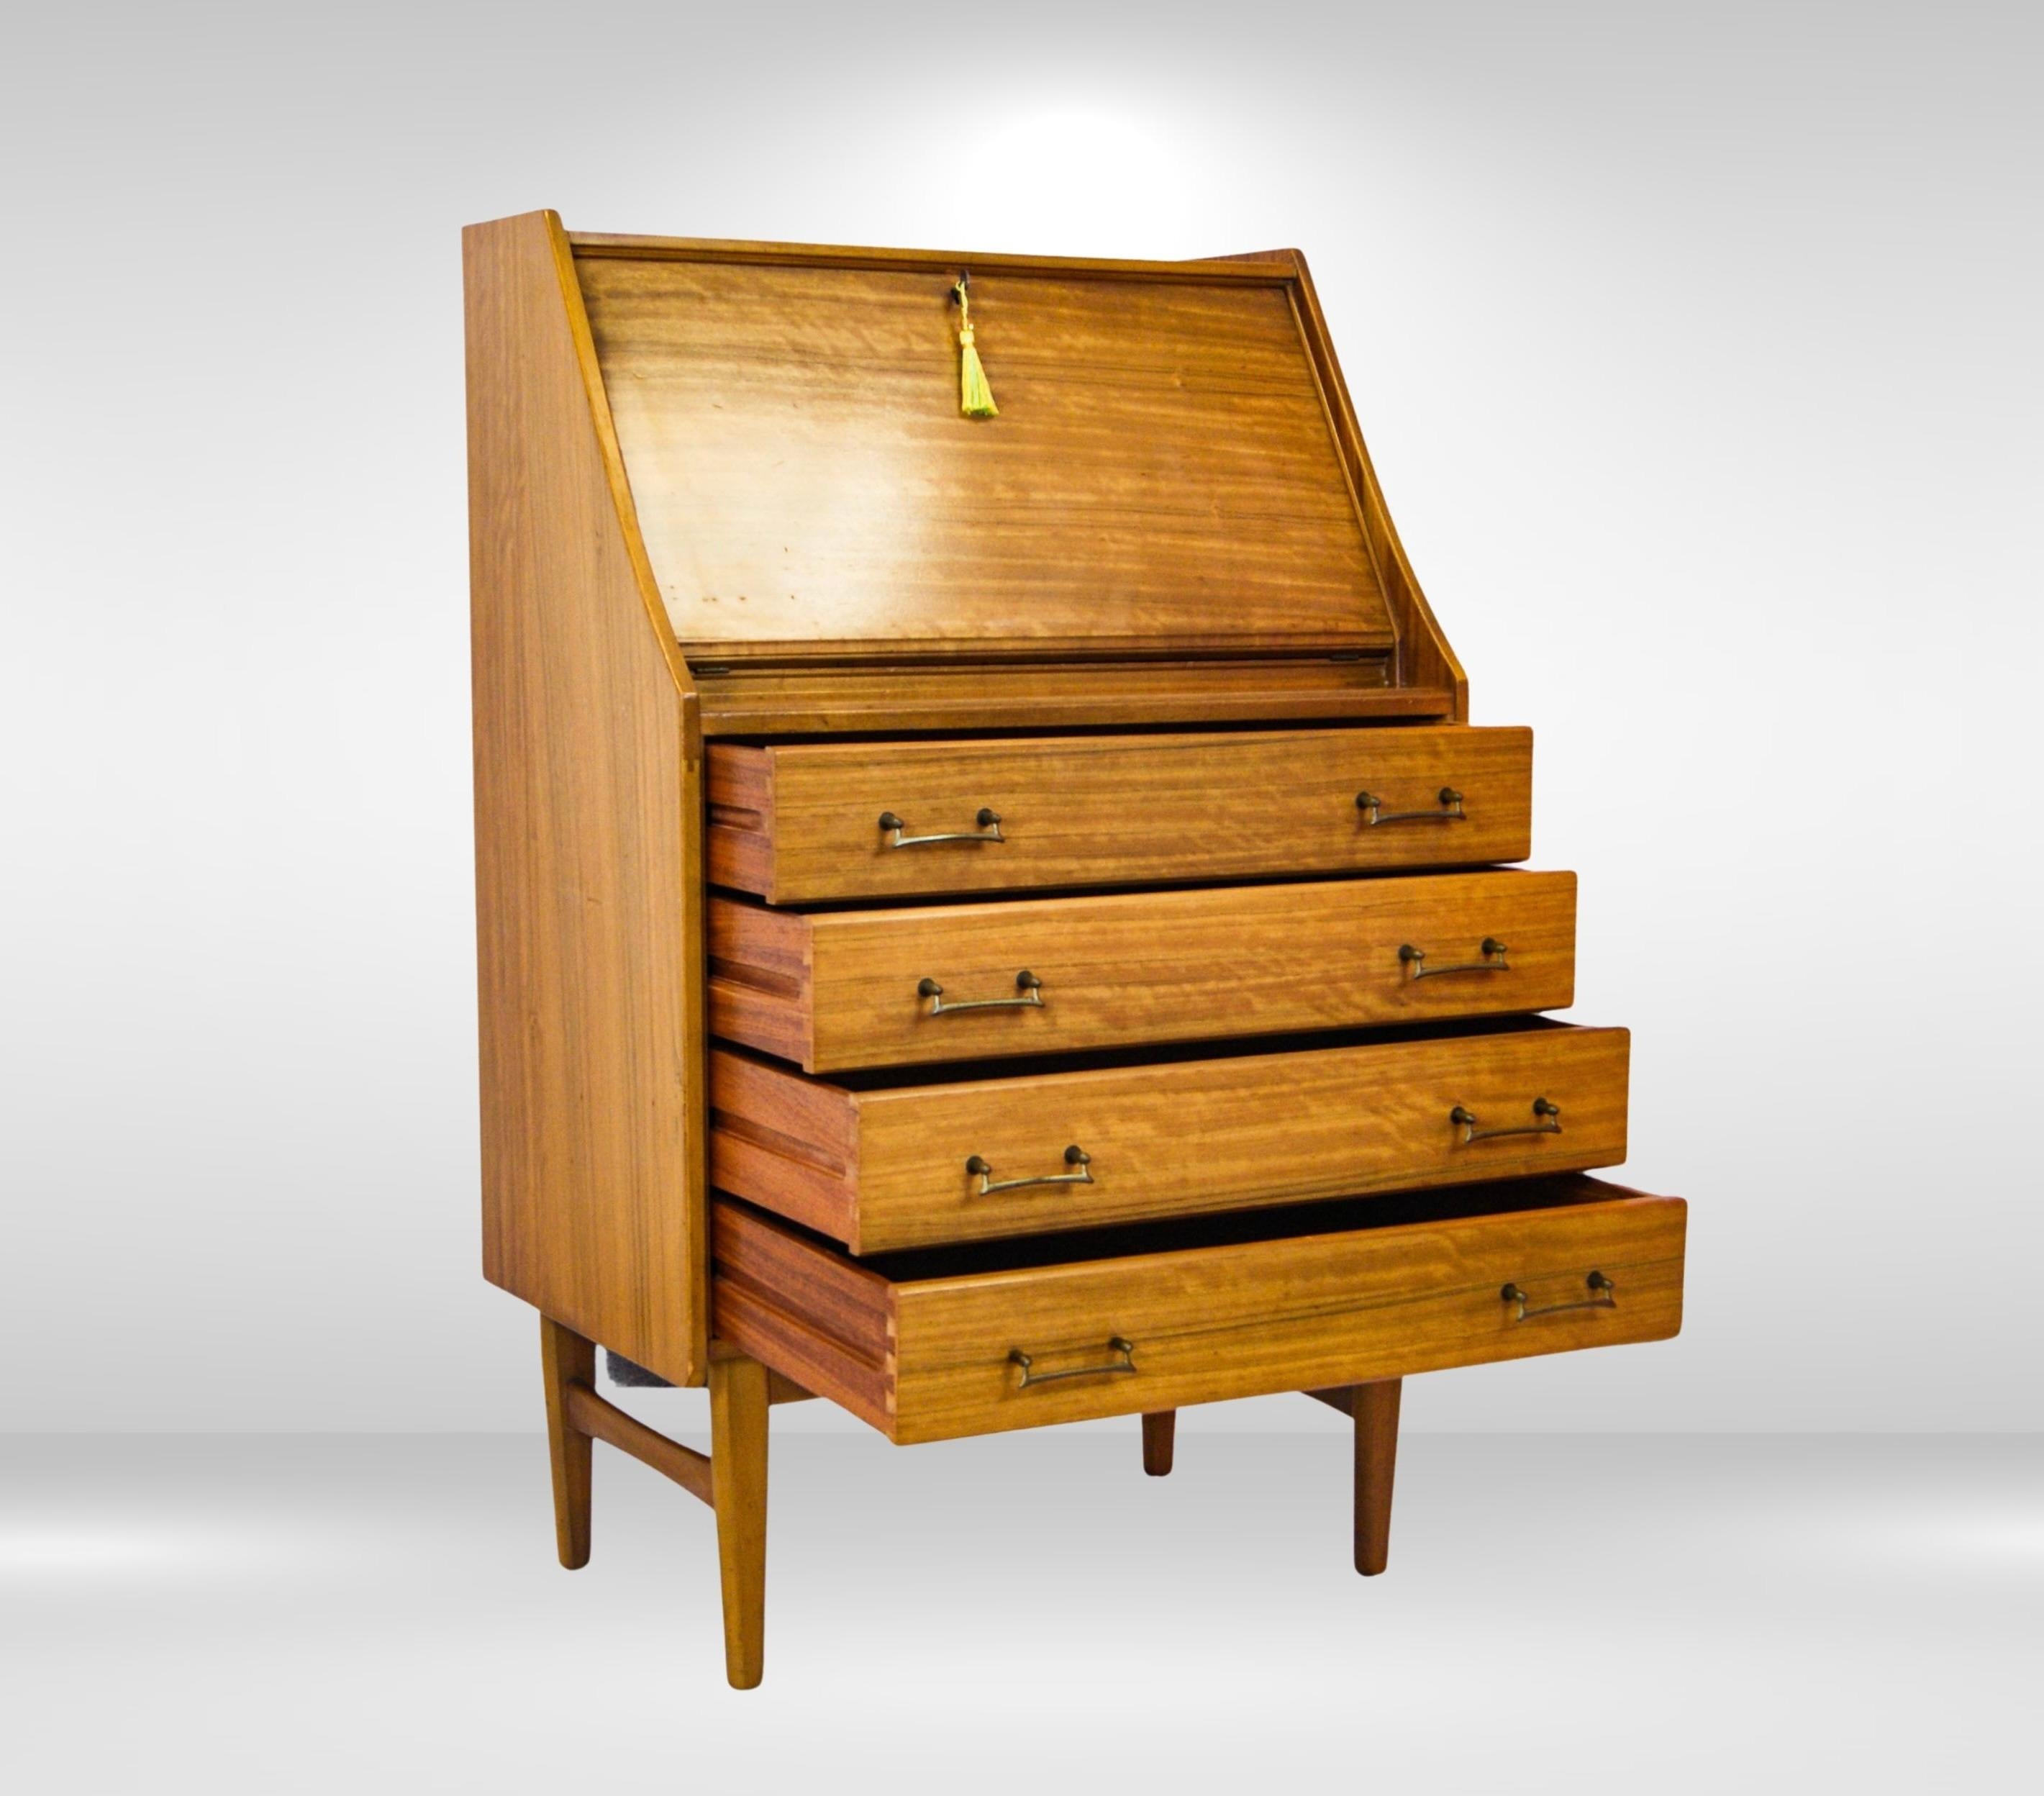 Retro 1950s Welters of Wycombe Secrétaire Bureau Desk with leather lined flipdown platform
Lockable 1960s home office desk with several useful storage compartments.
Made of solid wood, with elm veneer exterior and solid brass thin pull handles.
The